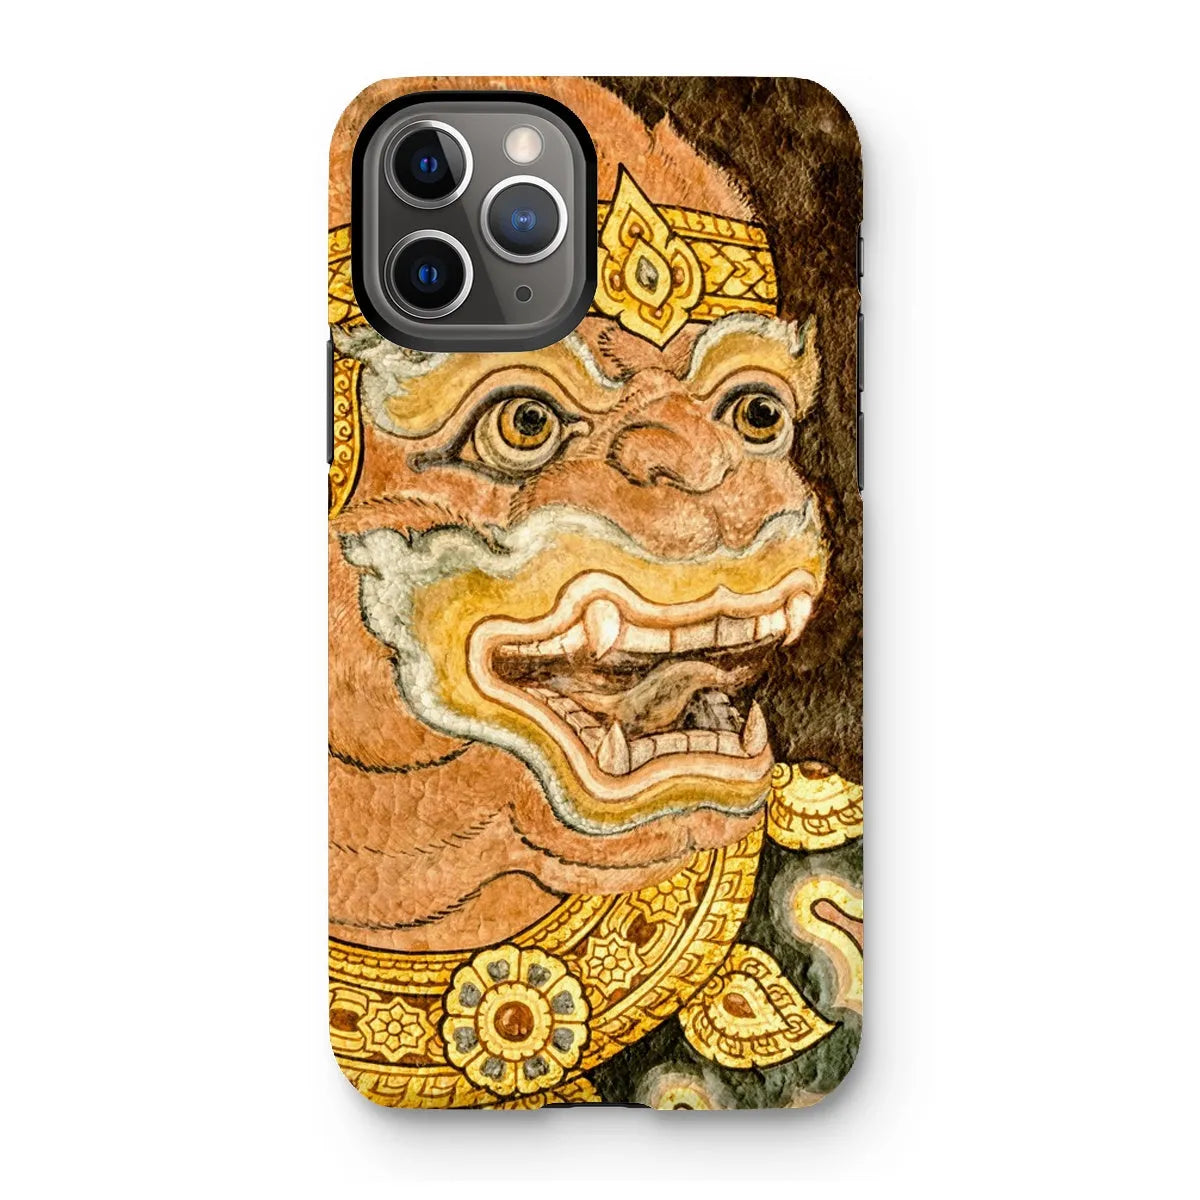 Monkey See - Traditional Thai Aesthetic Art Phone Case - Iphone 11 Pro / Matte - Mobile Phone Cases - Aesthetic Art